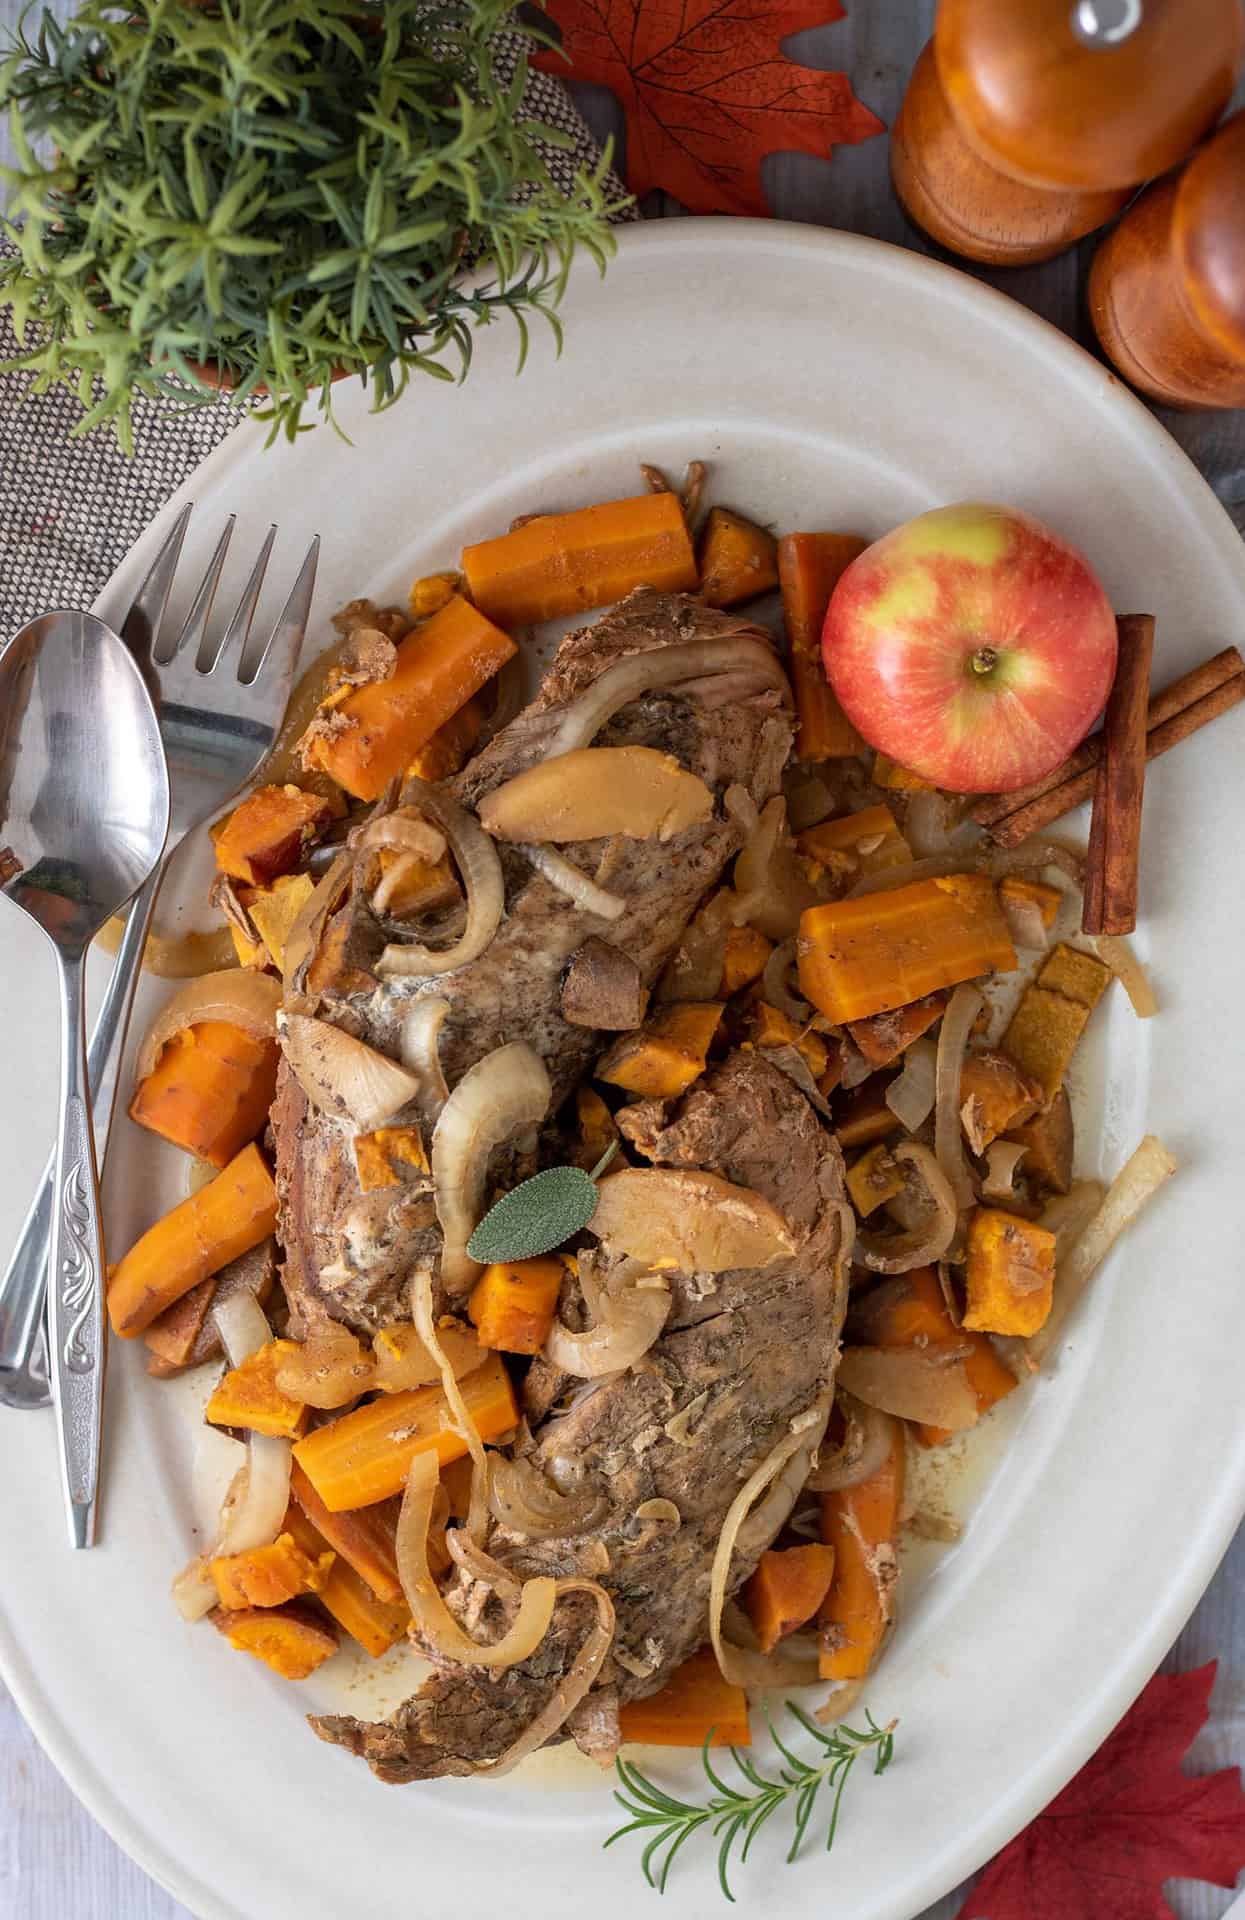 A large oval serving platter with apple cider pork tenderloin on top of carrots, onions and sweet potatoes.  There's a red apple on the serving platter and two silver serving utensils.  There's a small fresh rosemary plant in the background